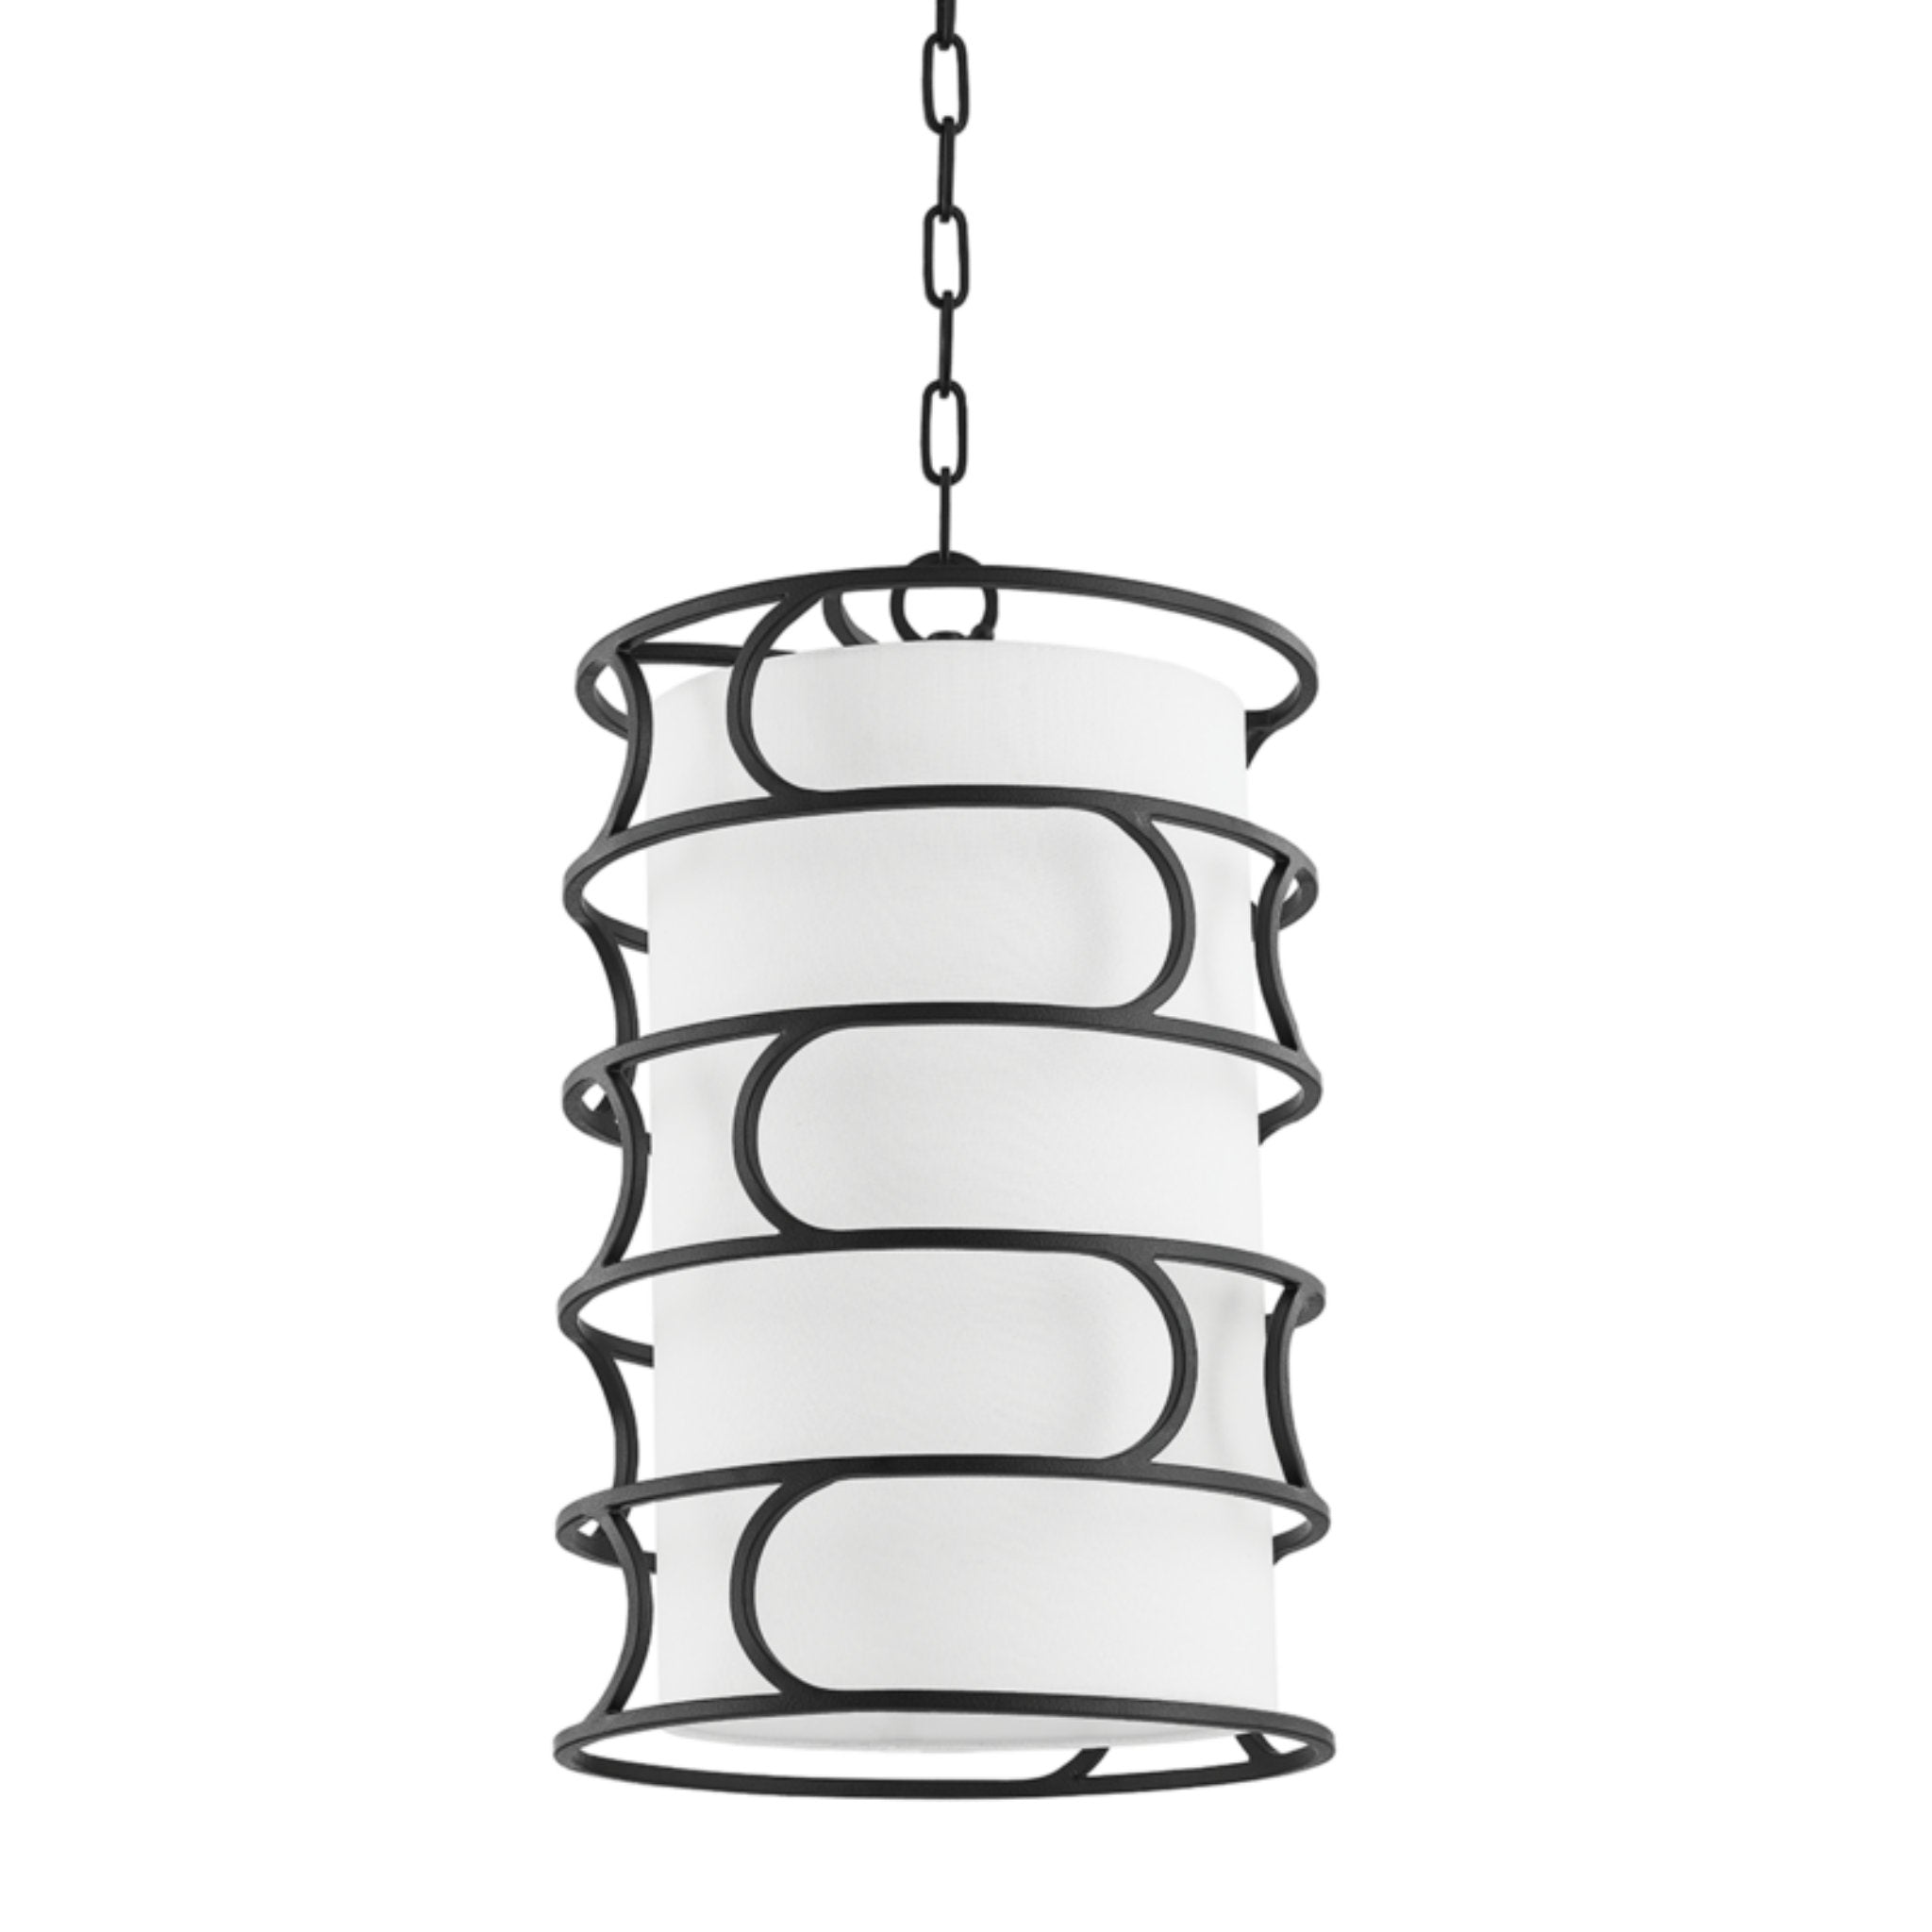 Reedley 3 Light Pendant in Forged Iron